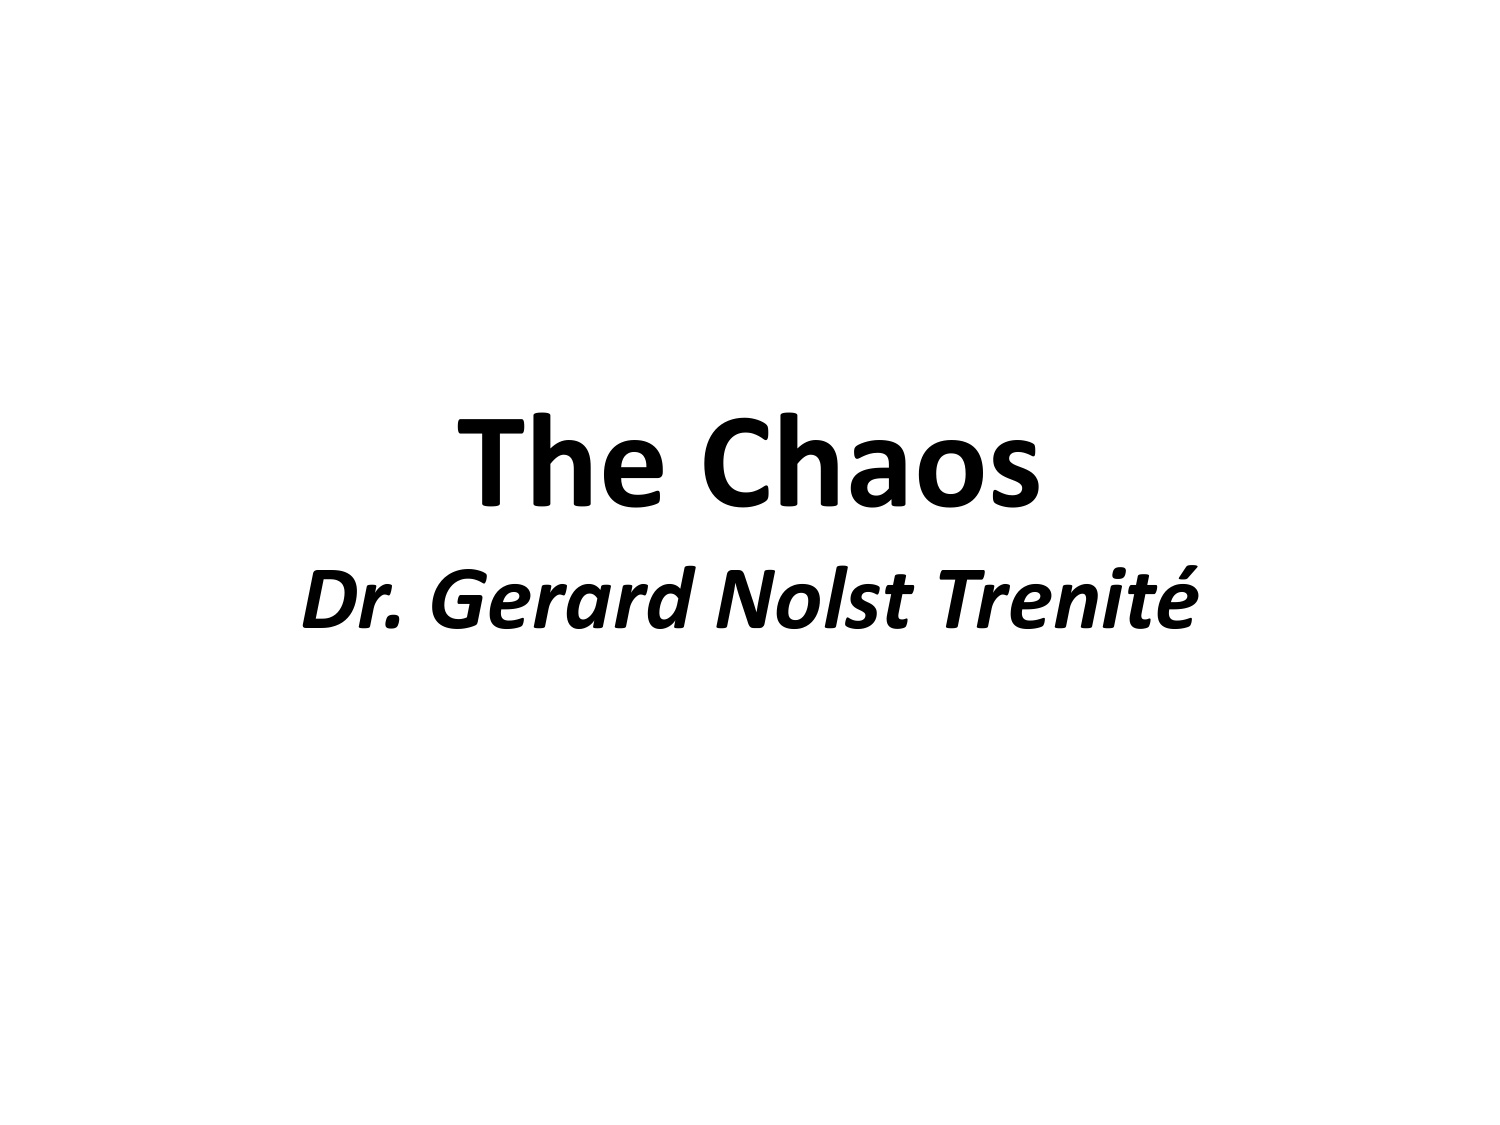 First three stanzas of The Chaos by Gerard Nolst Trenité : r